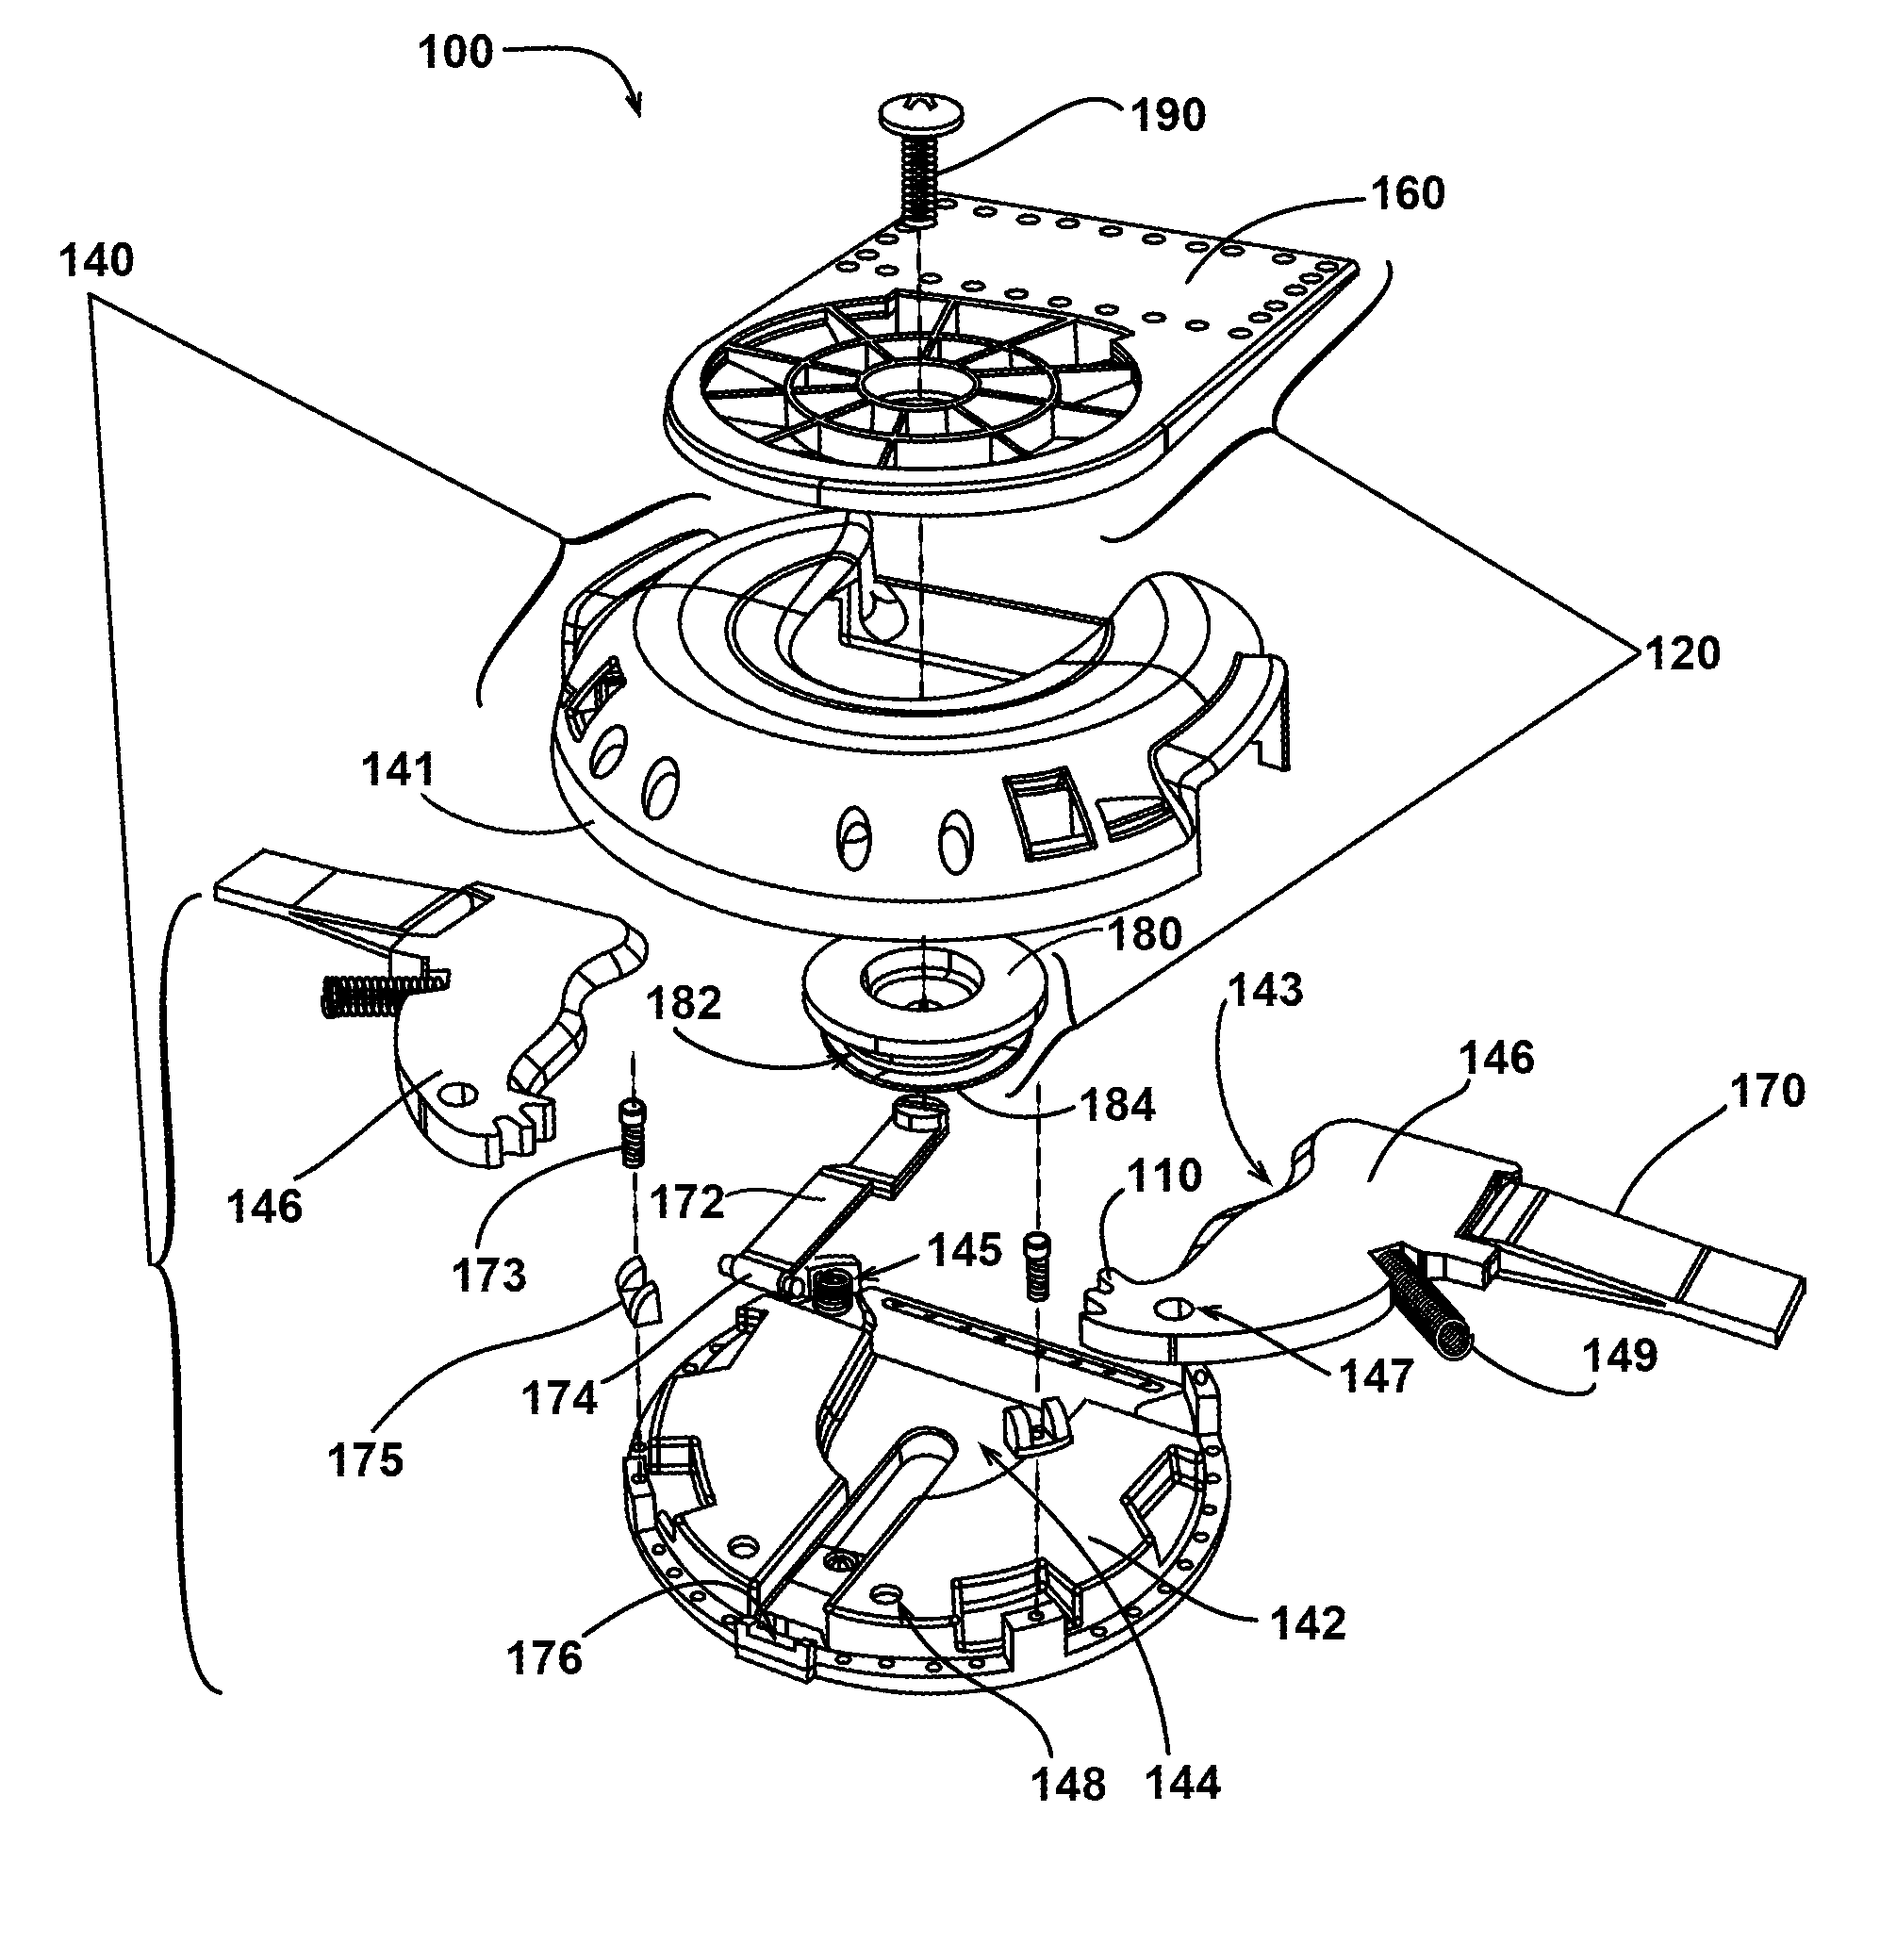 Load carriage connector and system